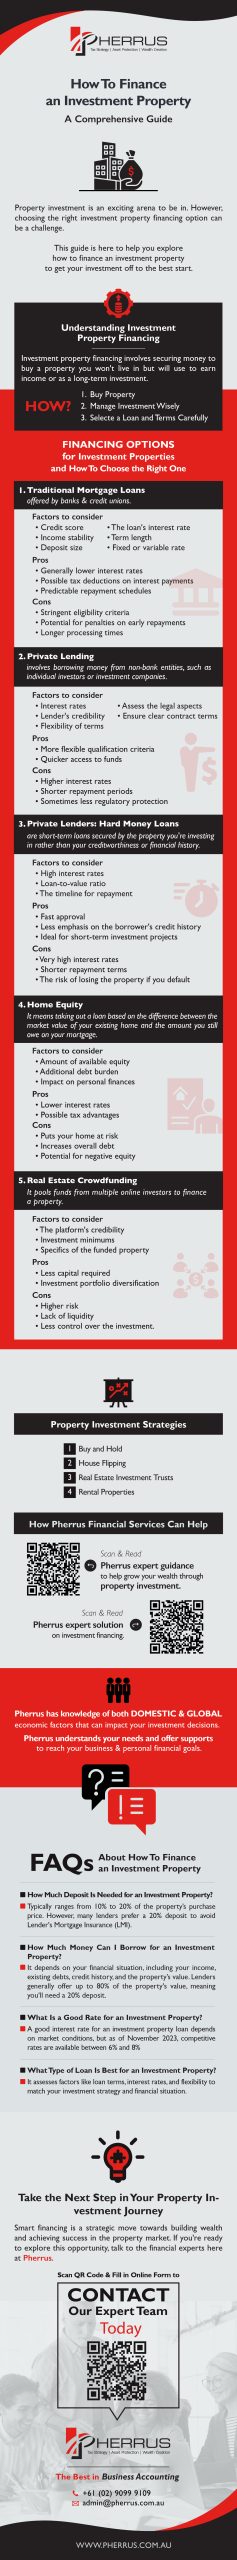 How To Finance an Investment Property - Infographic